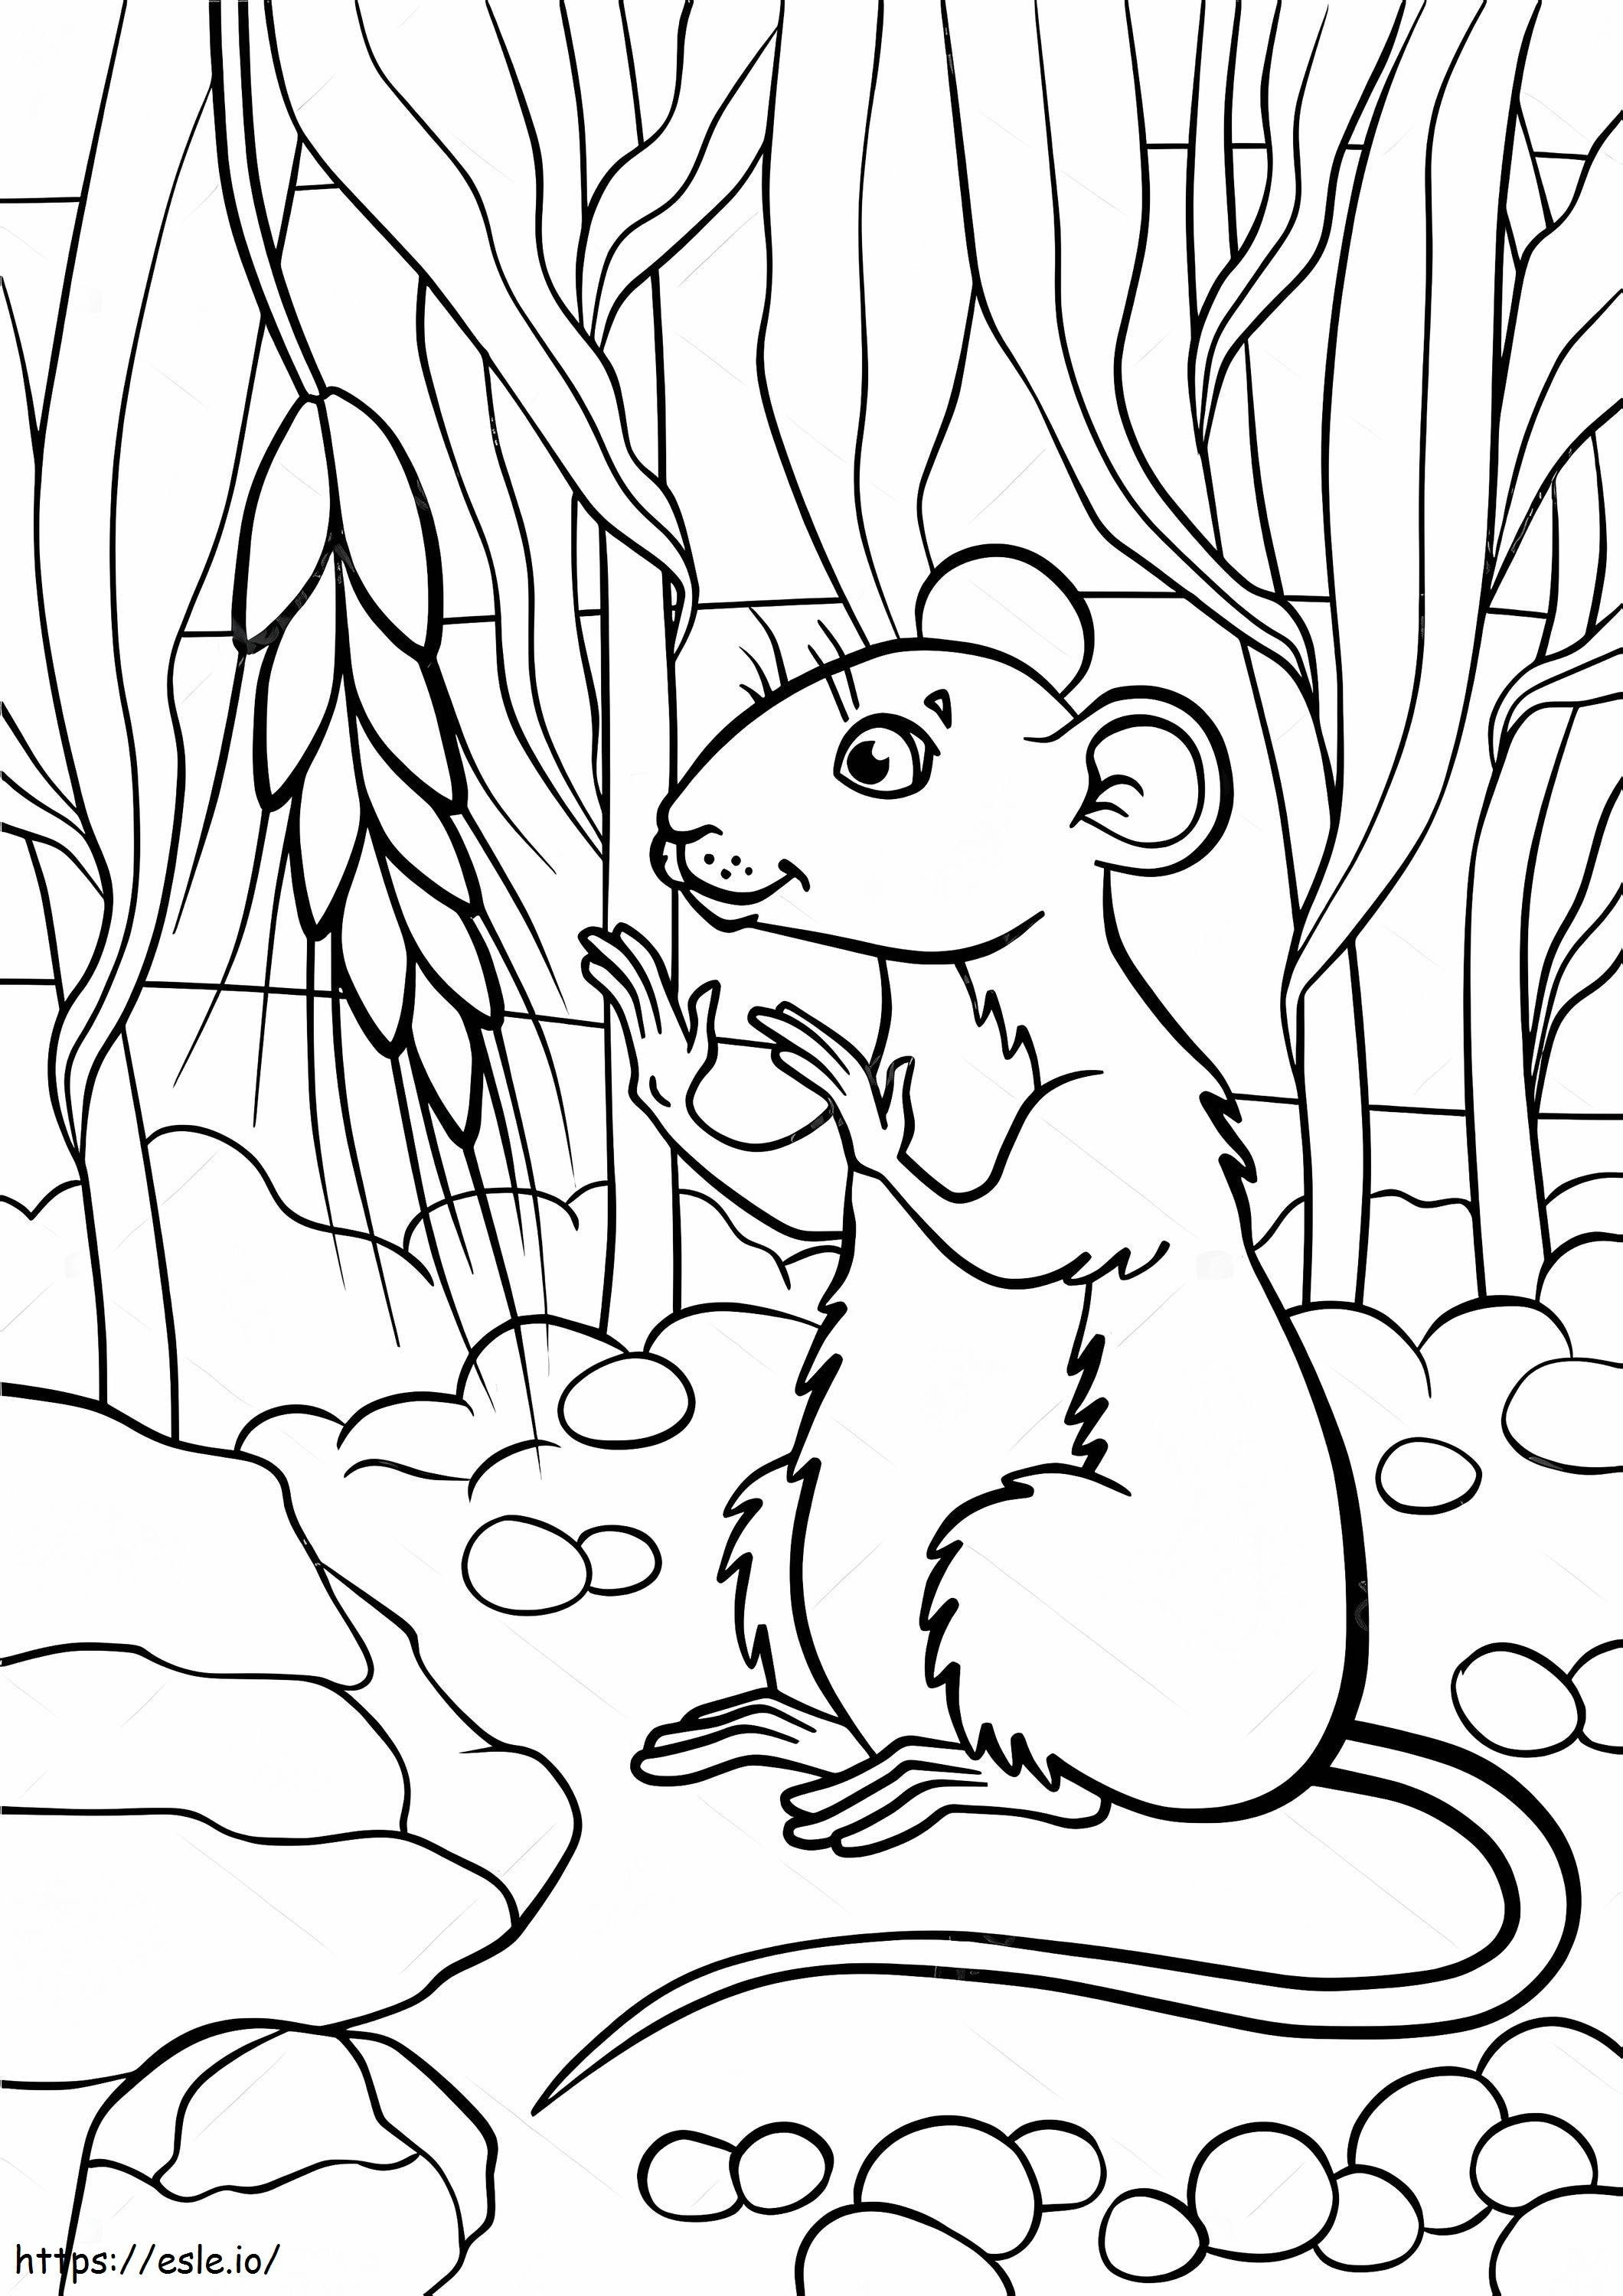 Little Cute Mouse Looks At The Piece Of Wheat coloring page